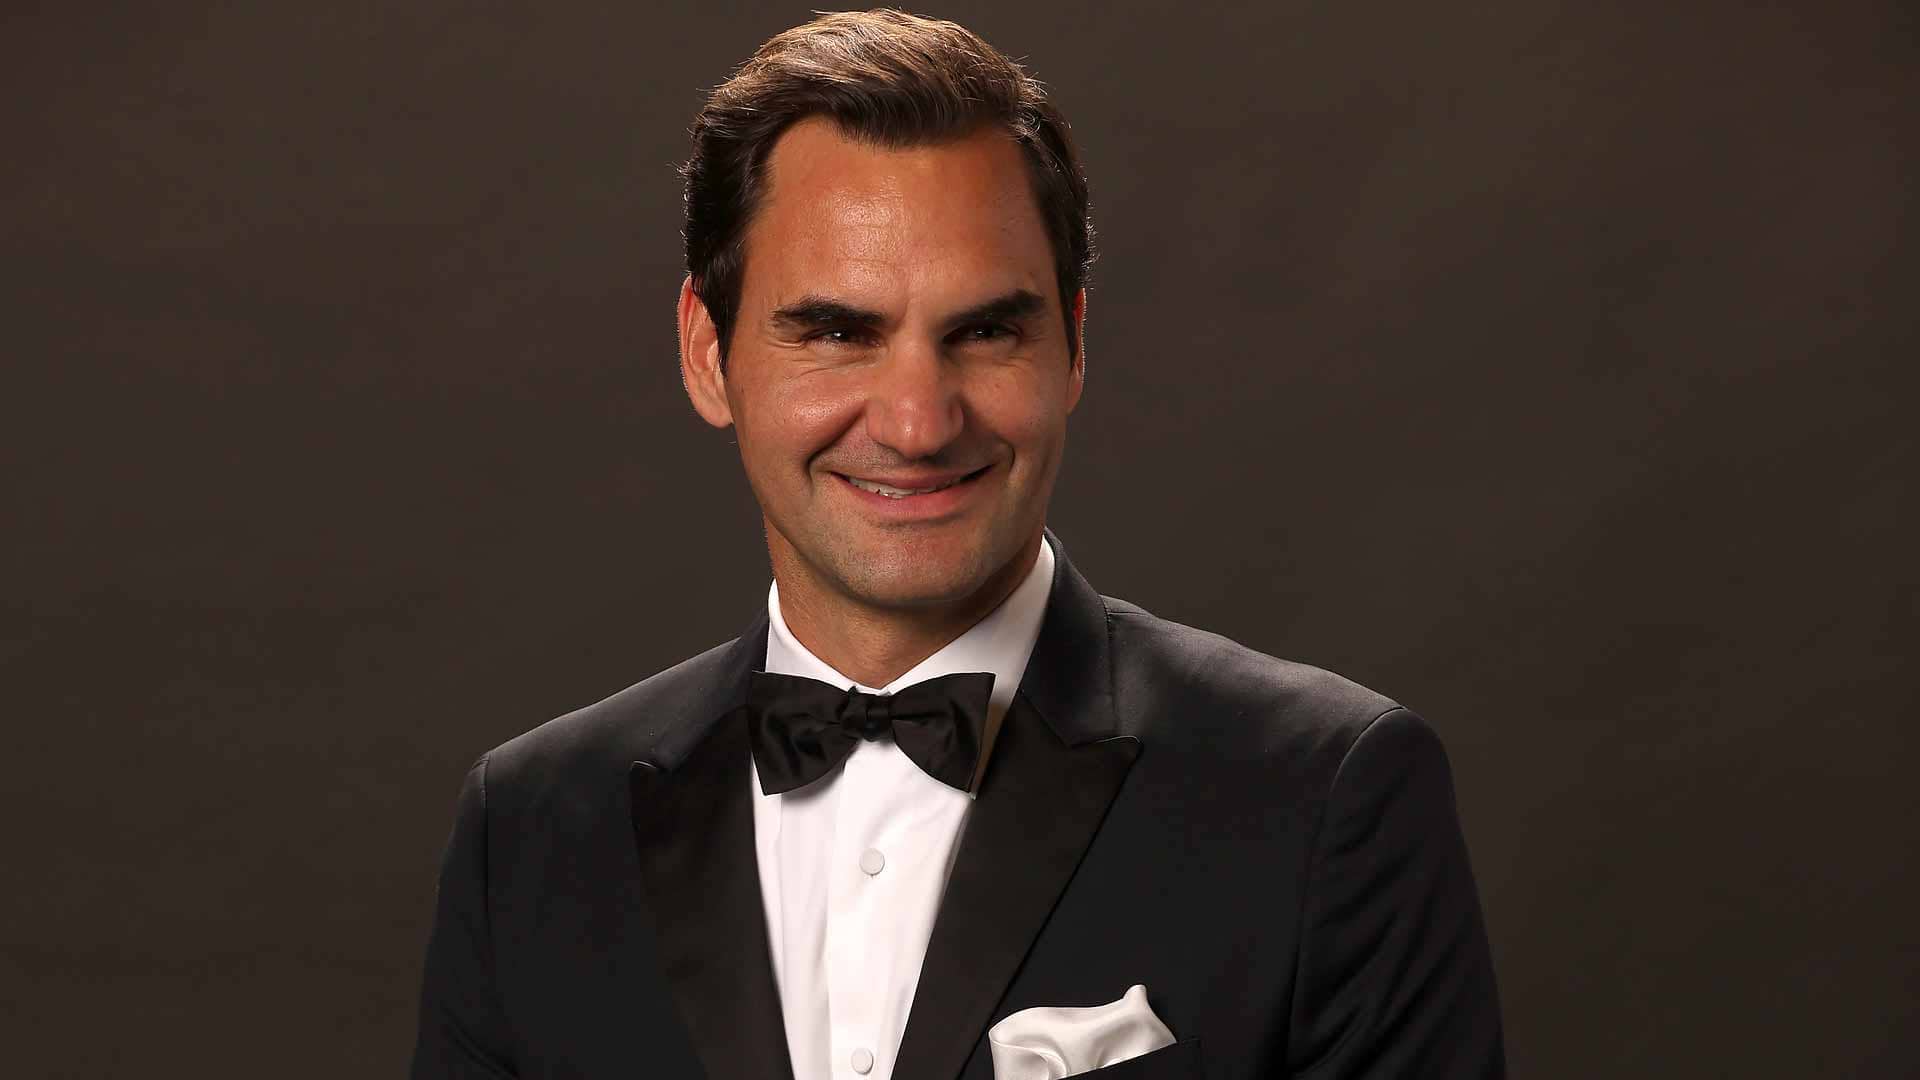 Roger Federer was named by Forbes one of the world's 10 highest-paid athletes.